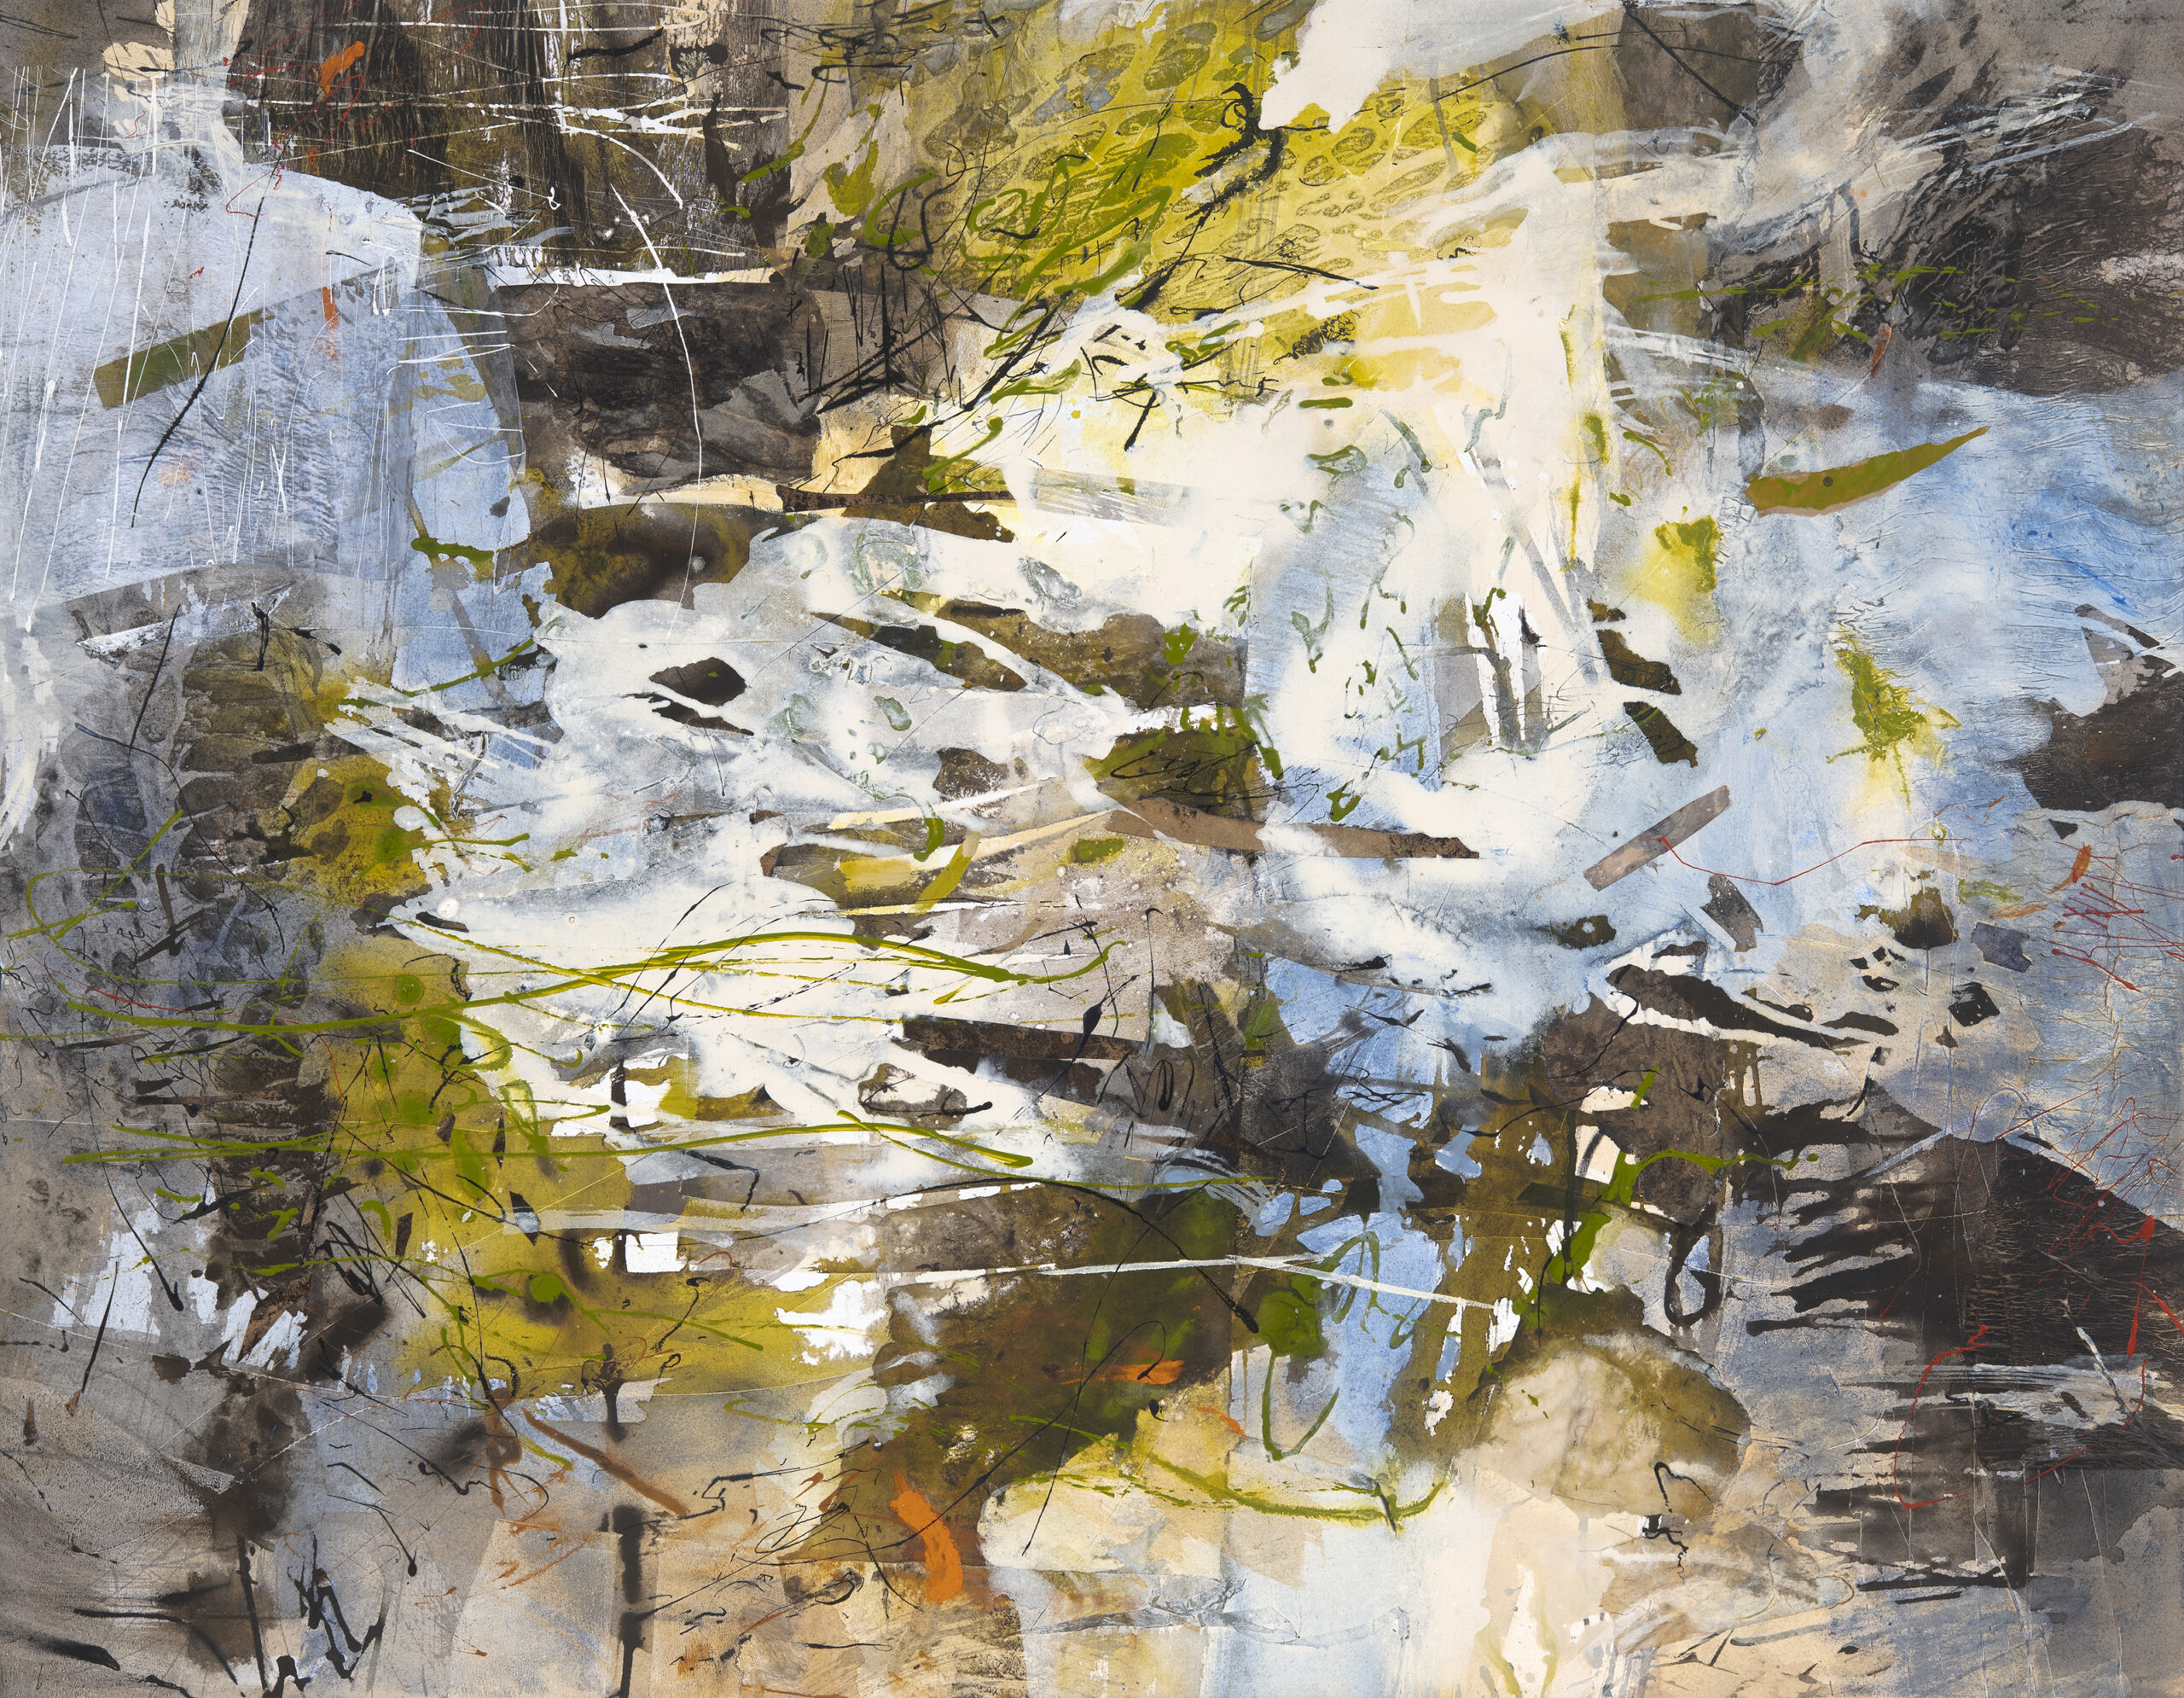 Judith White 'Seaweed' acrylic and collage on canvas 94 x 121cm $11,500